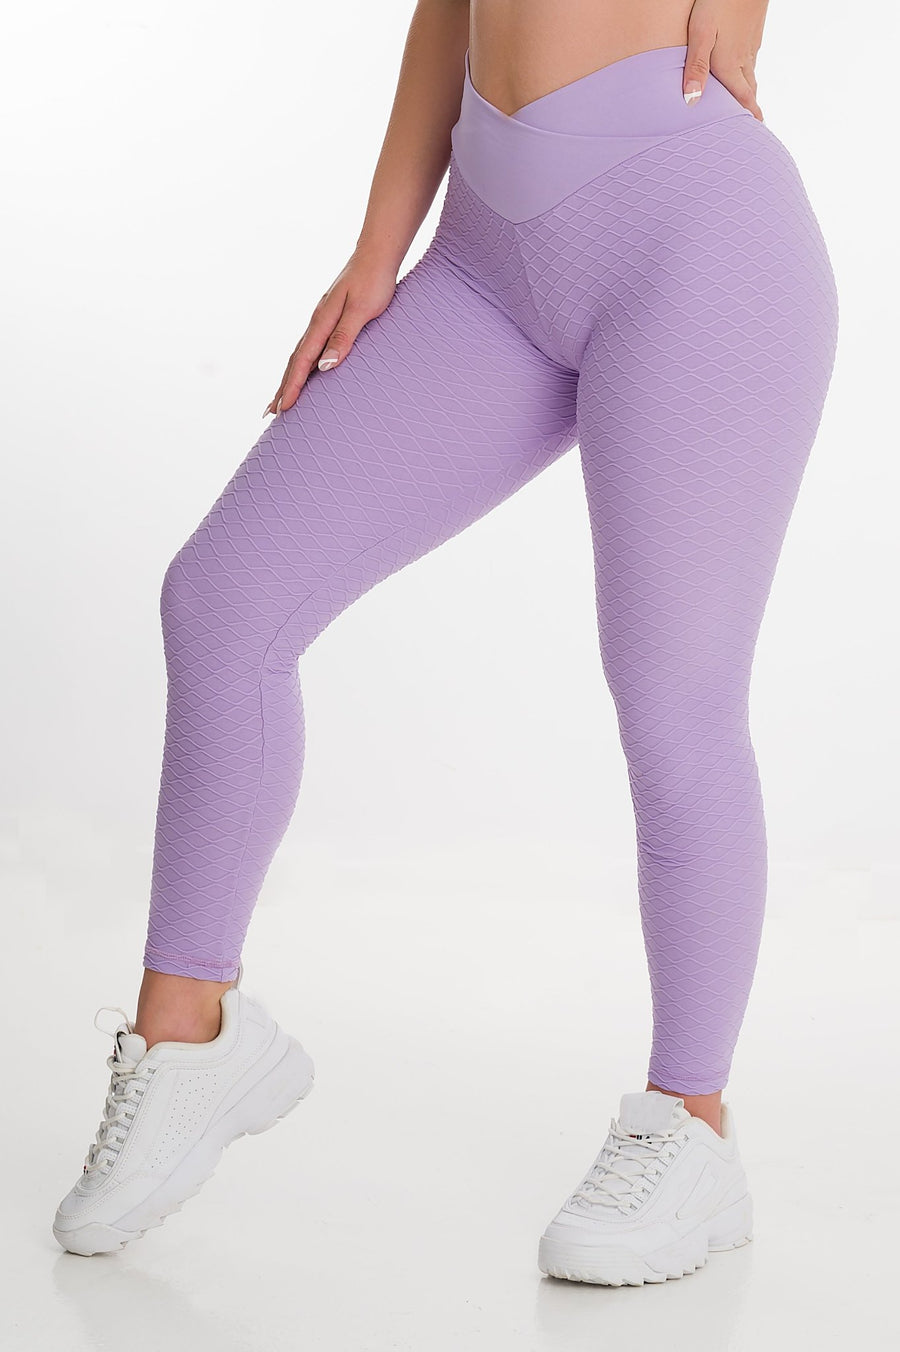 Flounce London gym running legging with drawstring waist and bum sculpt in  bright lilac